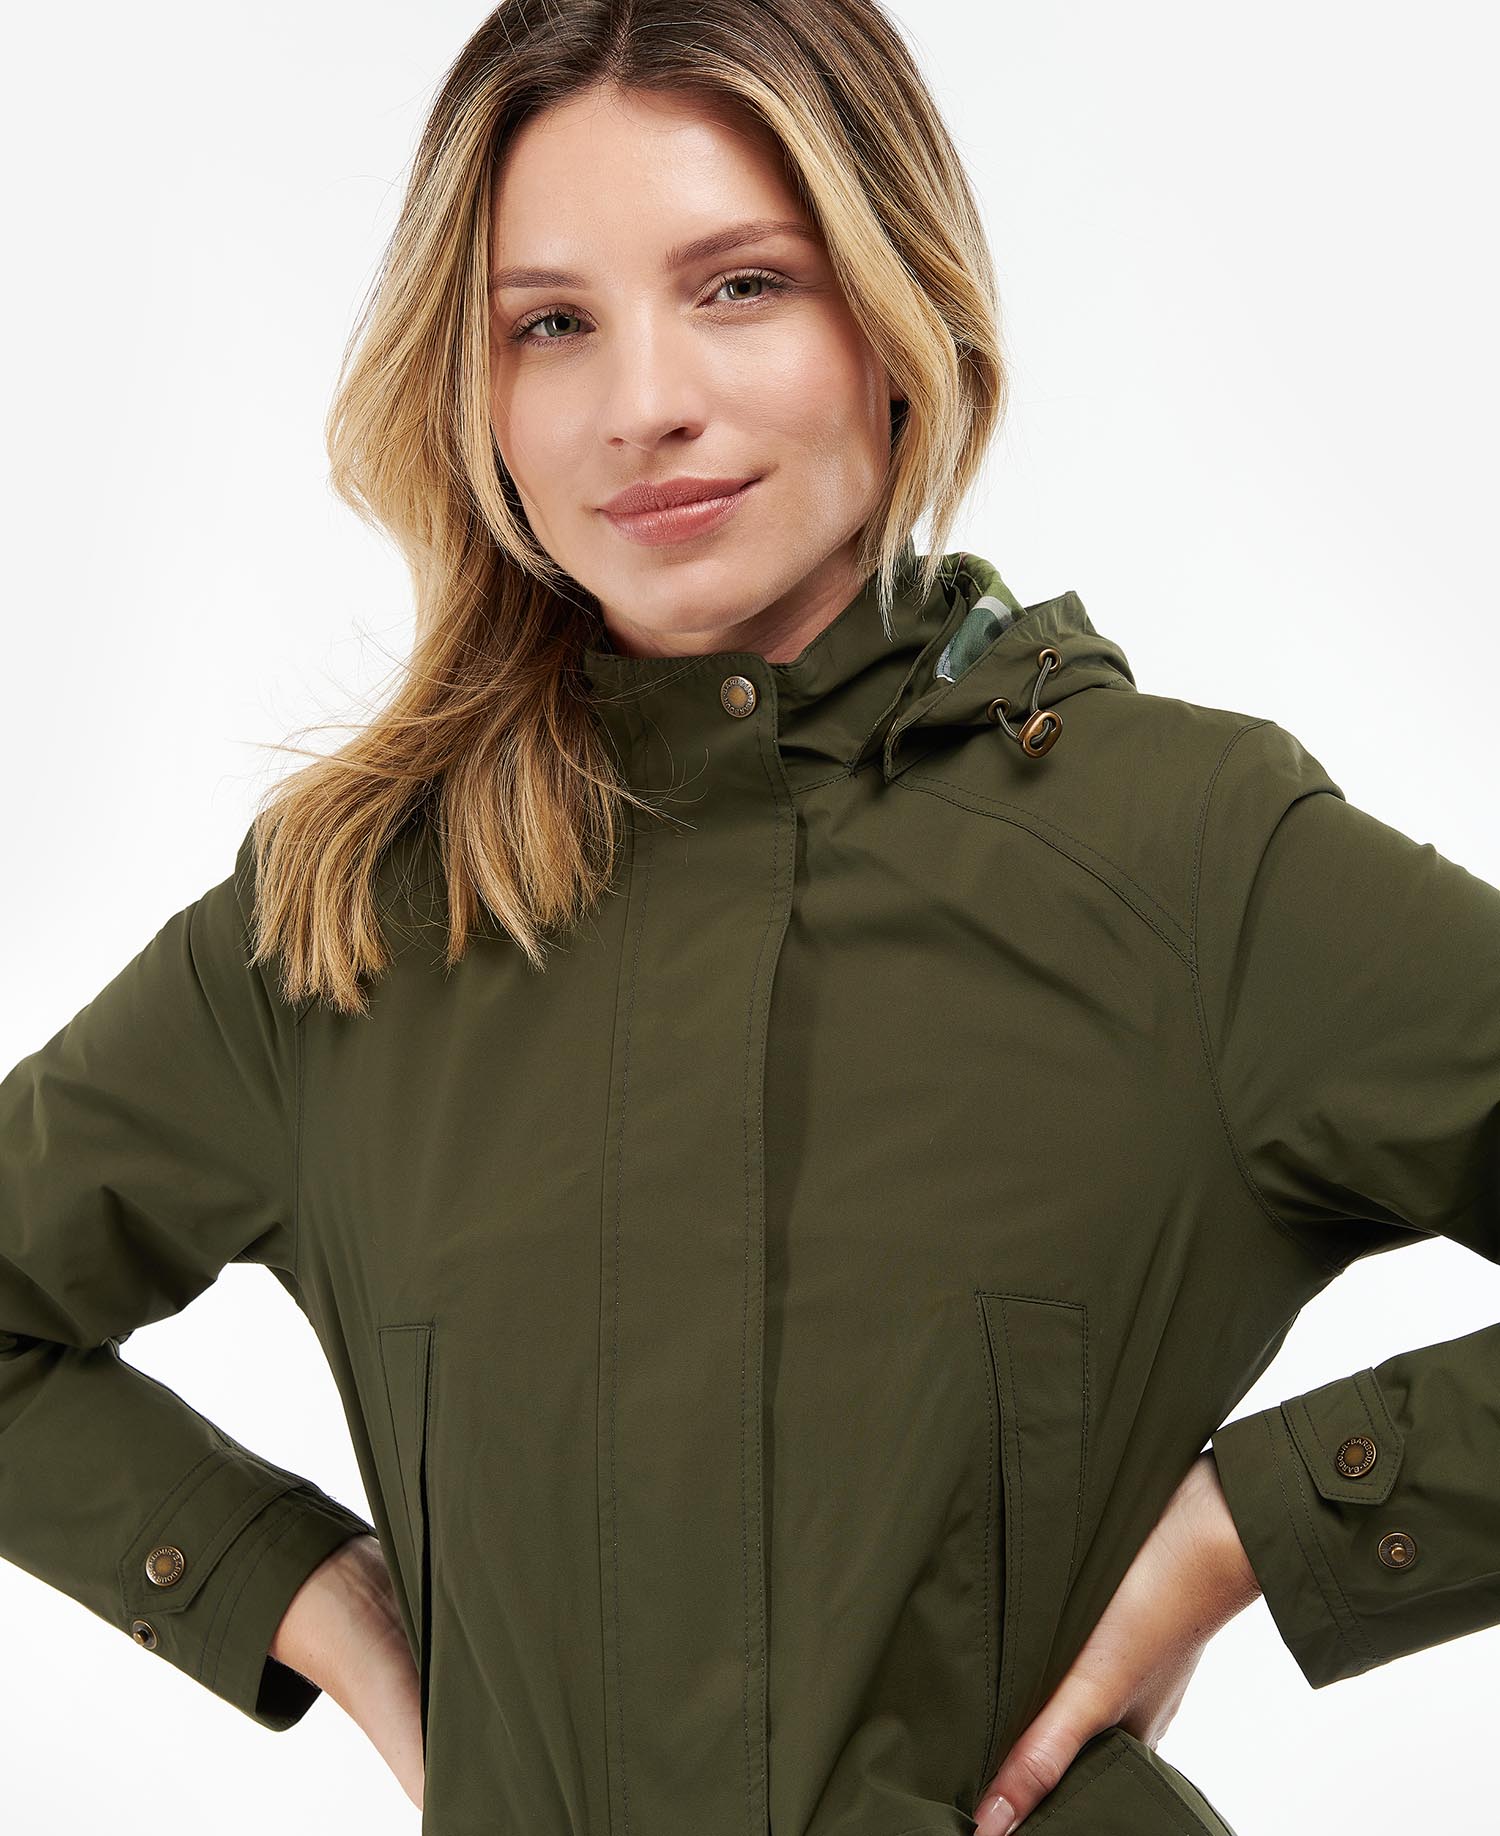 Shop Barbour Clyde Jacket here at Barbour. | Barbour